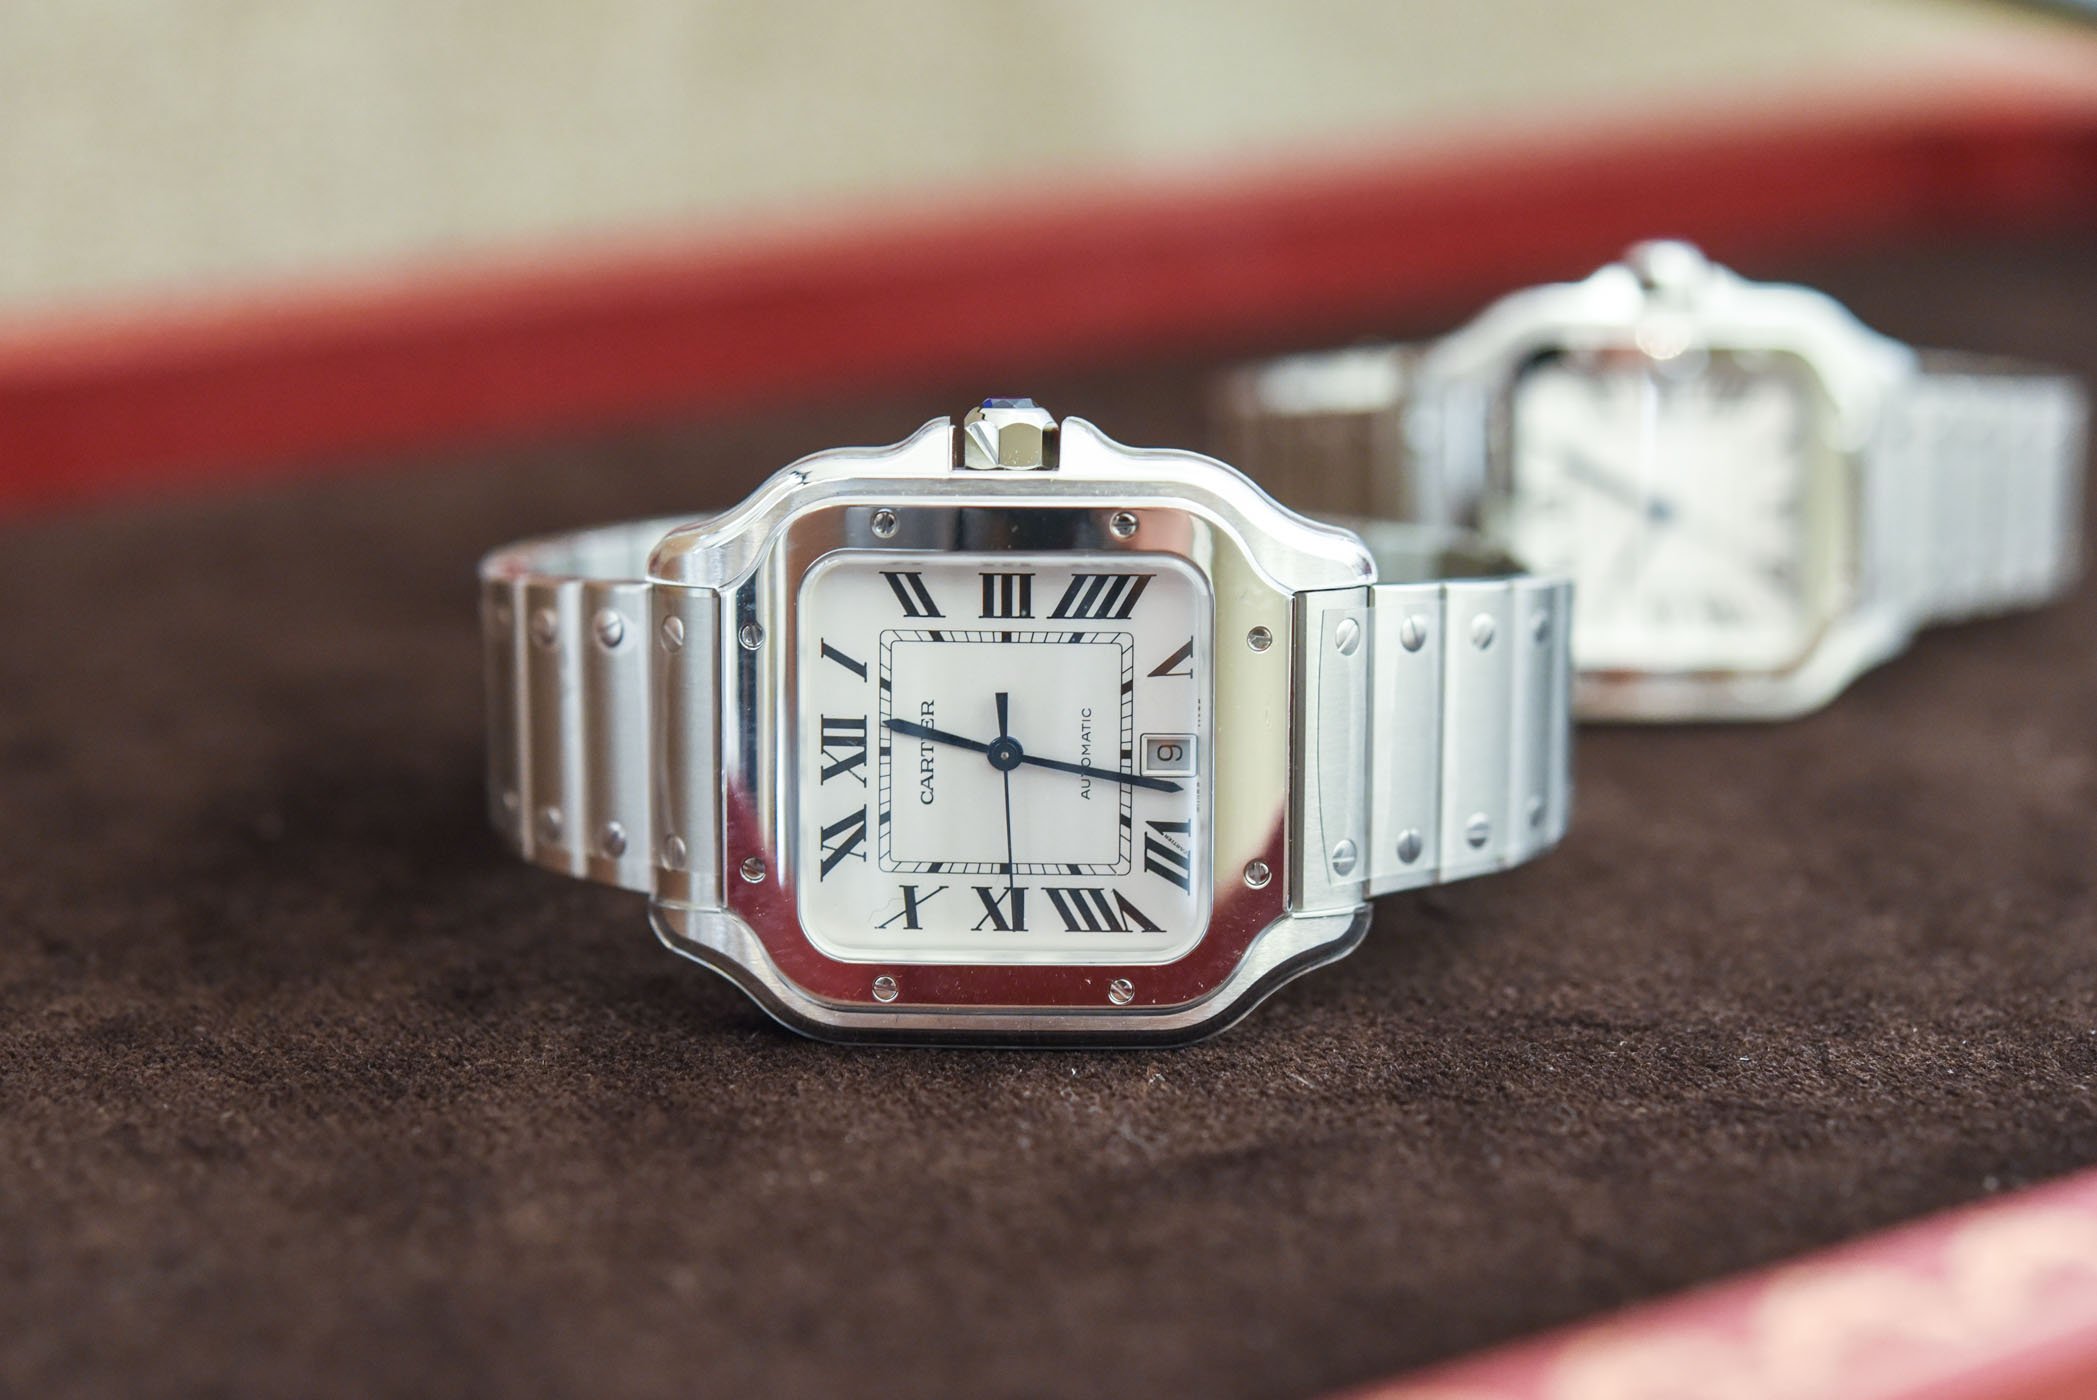 How to look up Cartier serial numbers to make sure the pieces are legit -  Quora